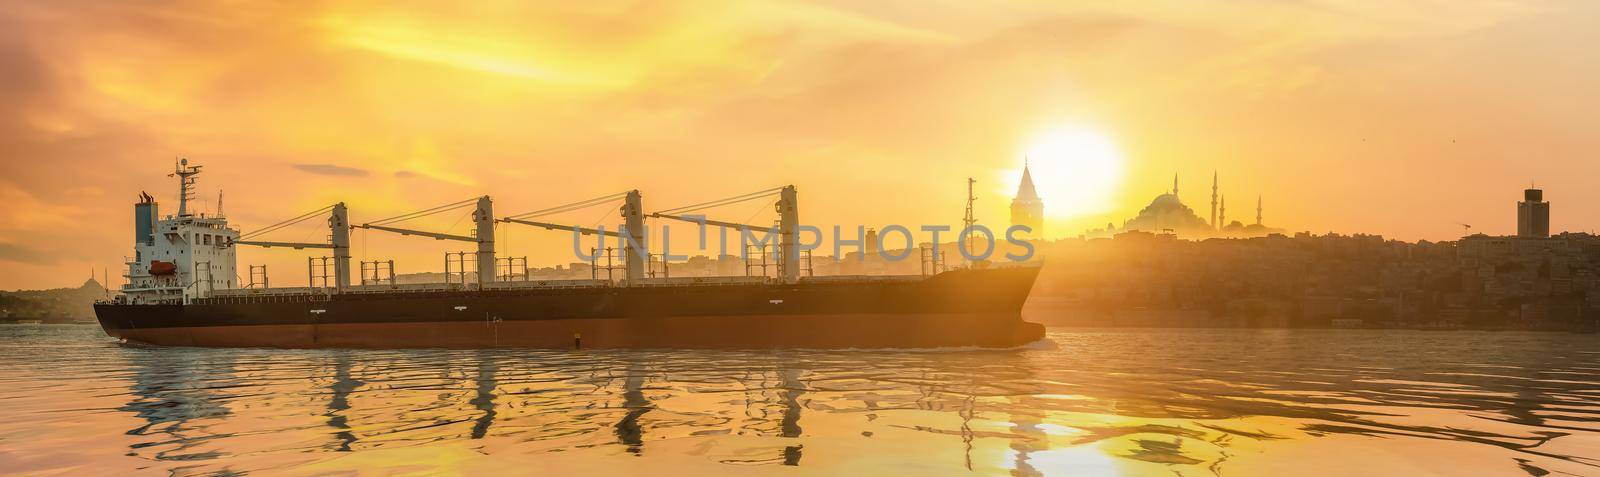 View on tanker in Bosphorus and cityscape of Istanbul, Turkey